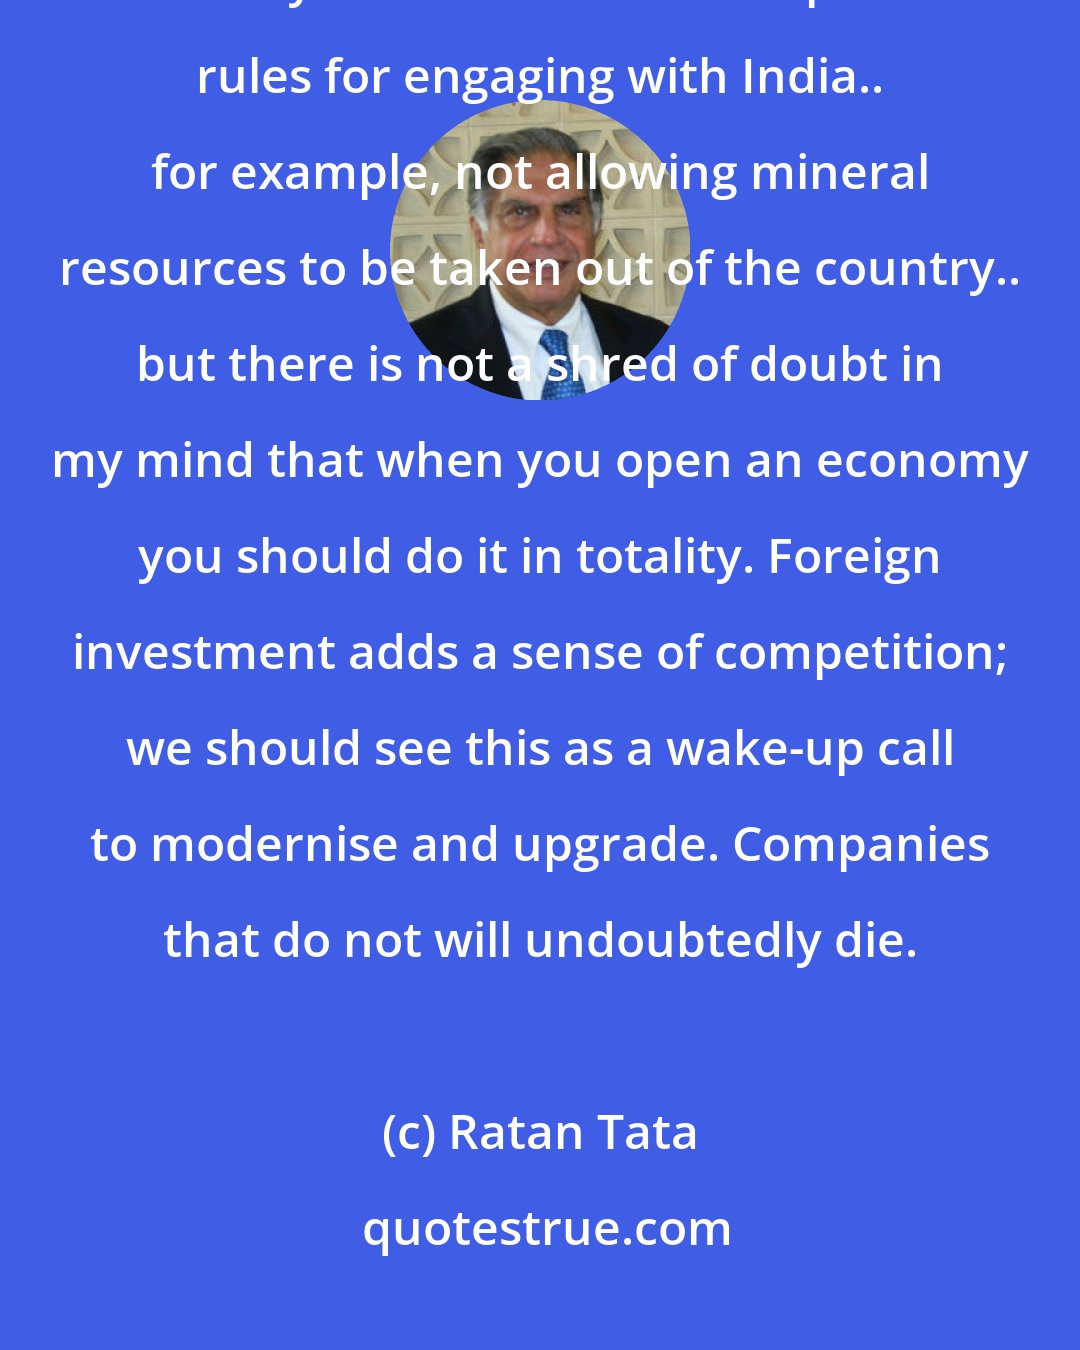 Ratan Tata: I've never believed protectionism of that kind will lead us anywhere. I think you can have certain specific rules for engaging with India.. for example, not allowing mineral resources to be taken out of the country.. but there is not a shred of doubt in my mind that when you open an economy you should do it in totality. Foreign investment adds a sense of competition; we should see this as a wake-up call to modernise and upgrade. Companies that do not will undoubtedly die.